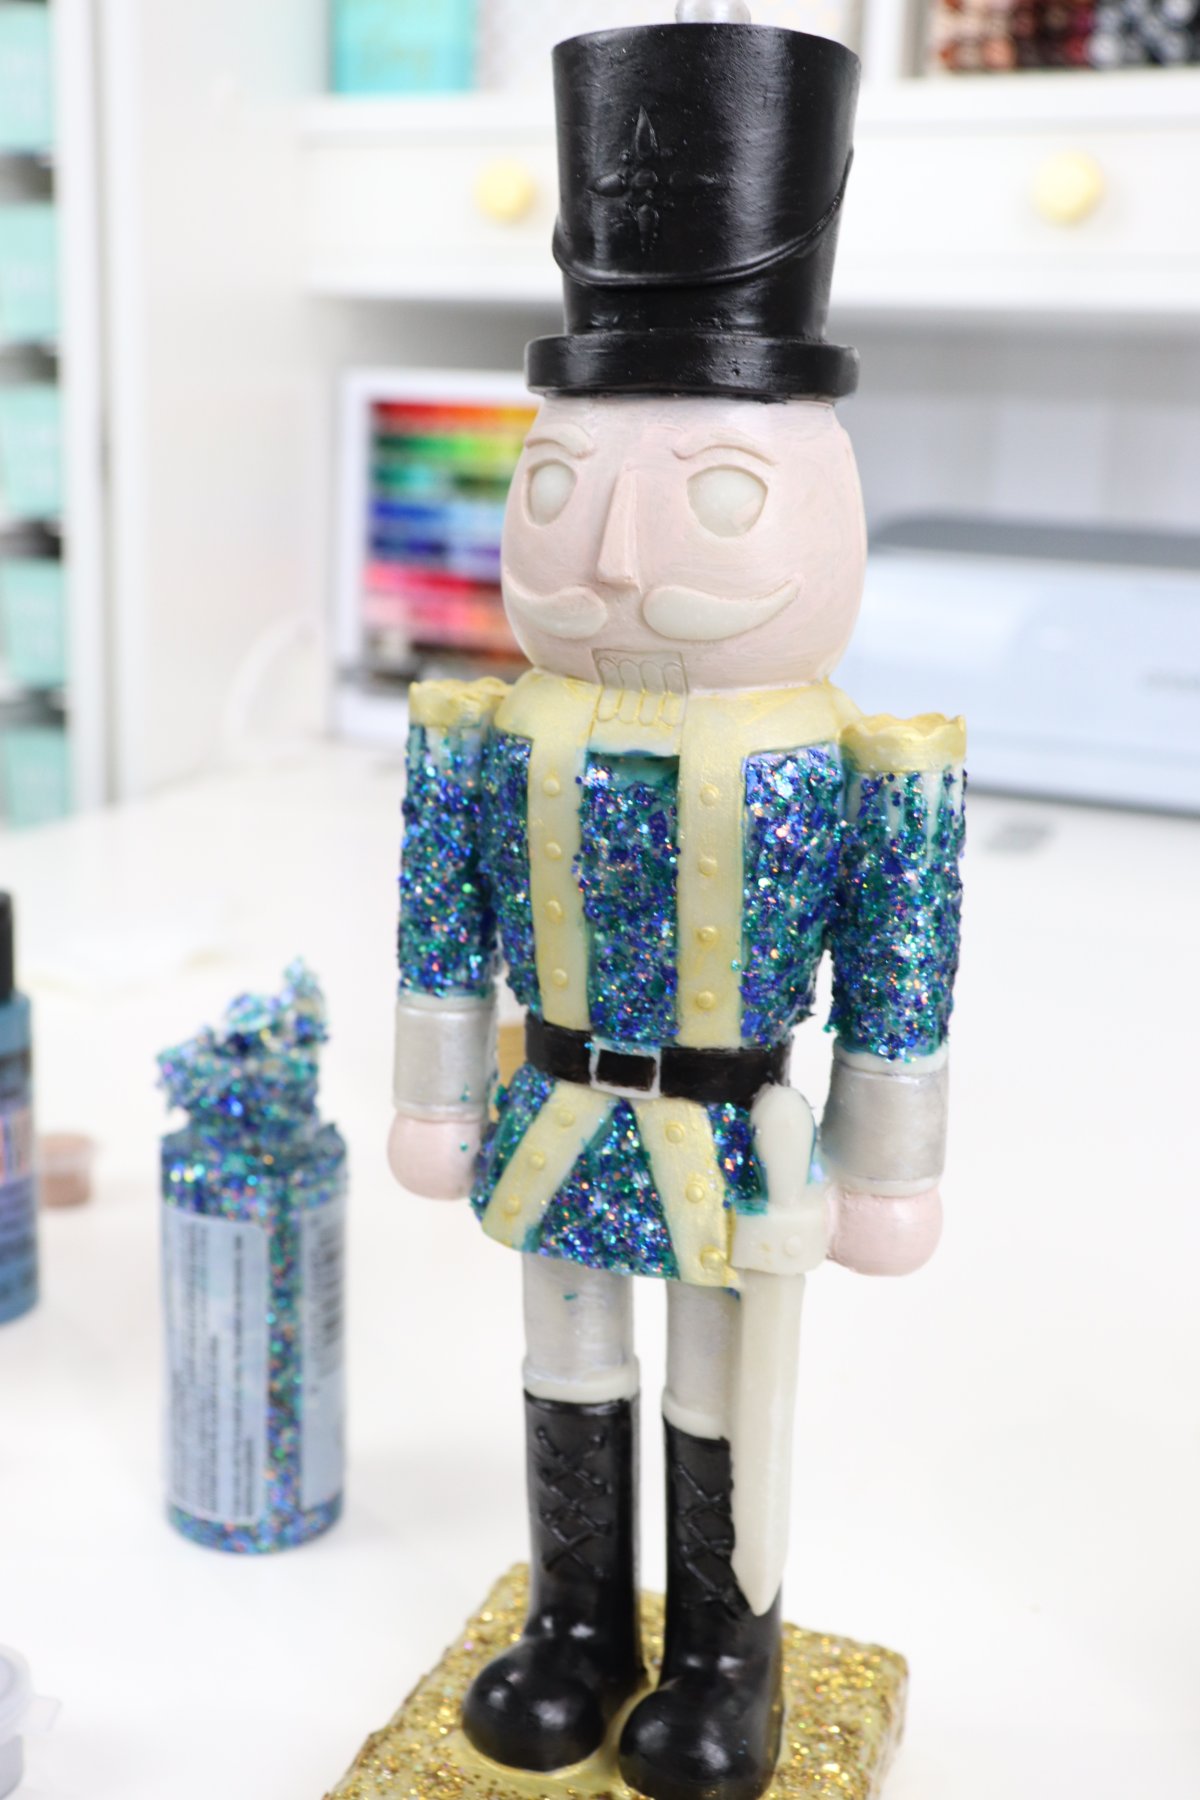 Image contains a partially painted and glittered nutcracker figurine with a jar of blue glitter paint beside it.